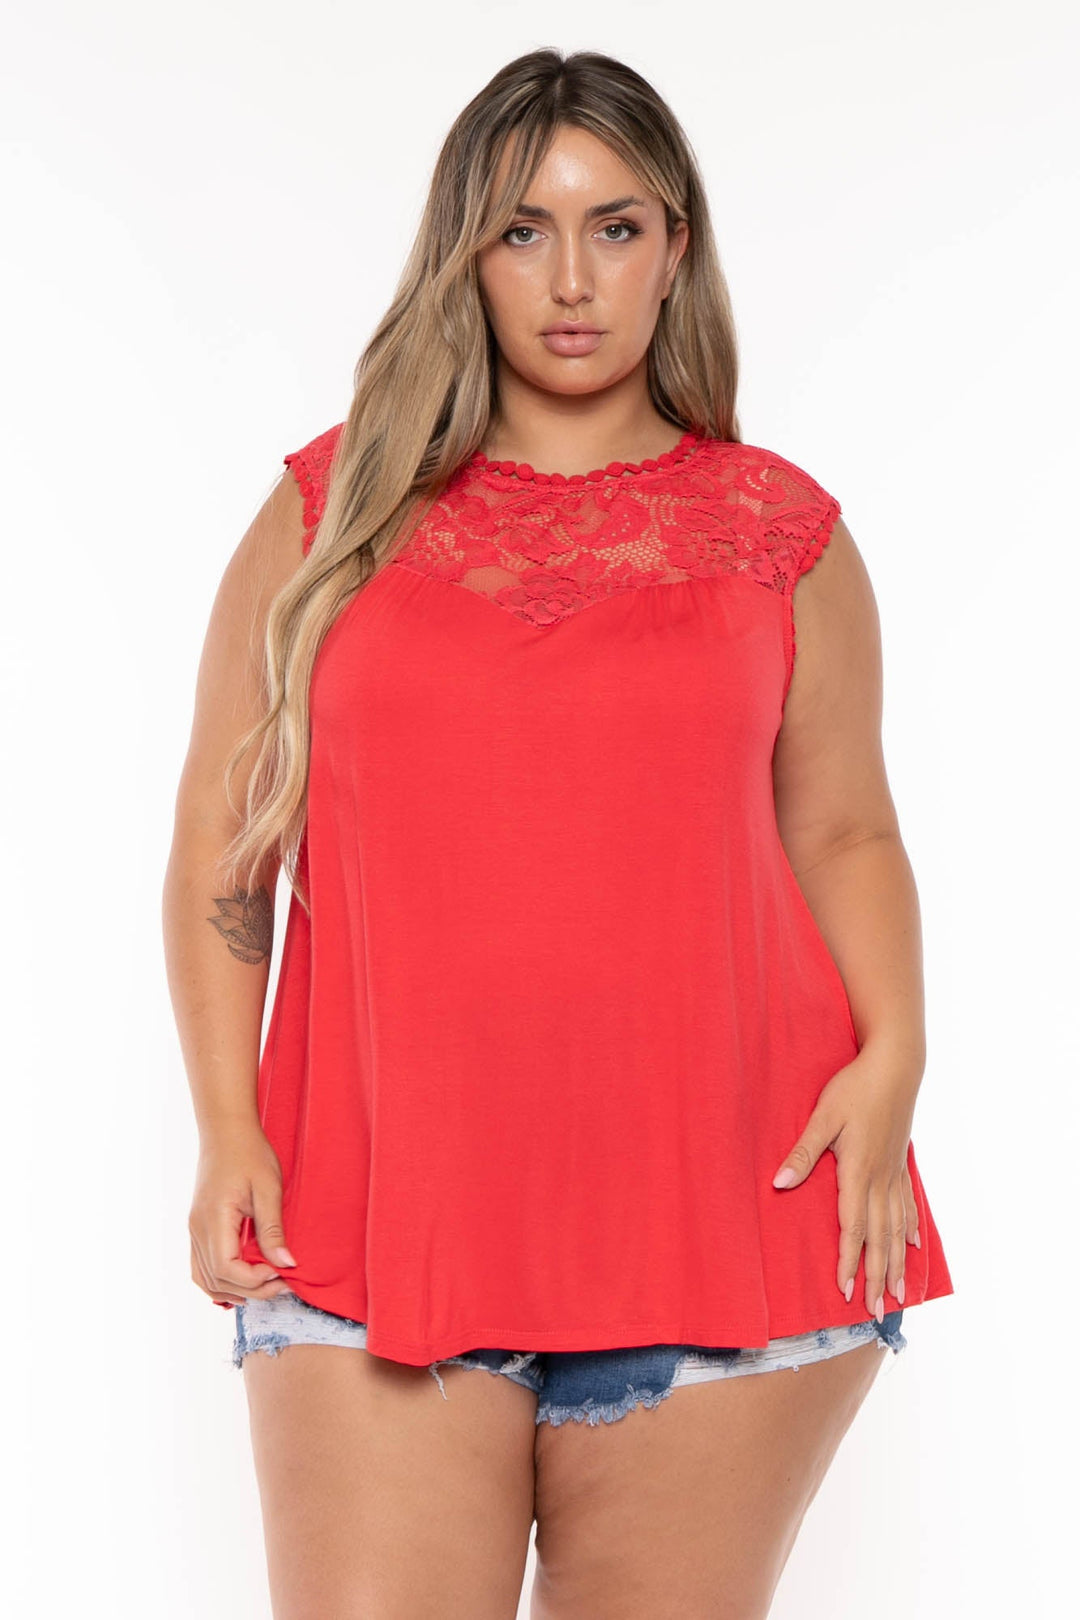 Emerald Tops Plus Size Aylin Sheer Lace Top- Coral